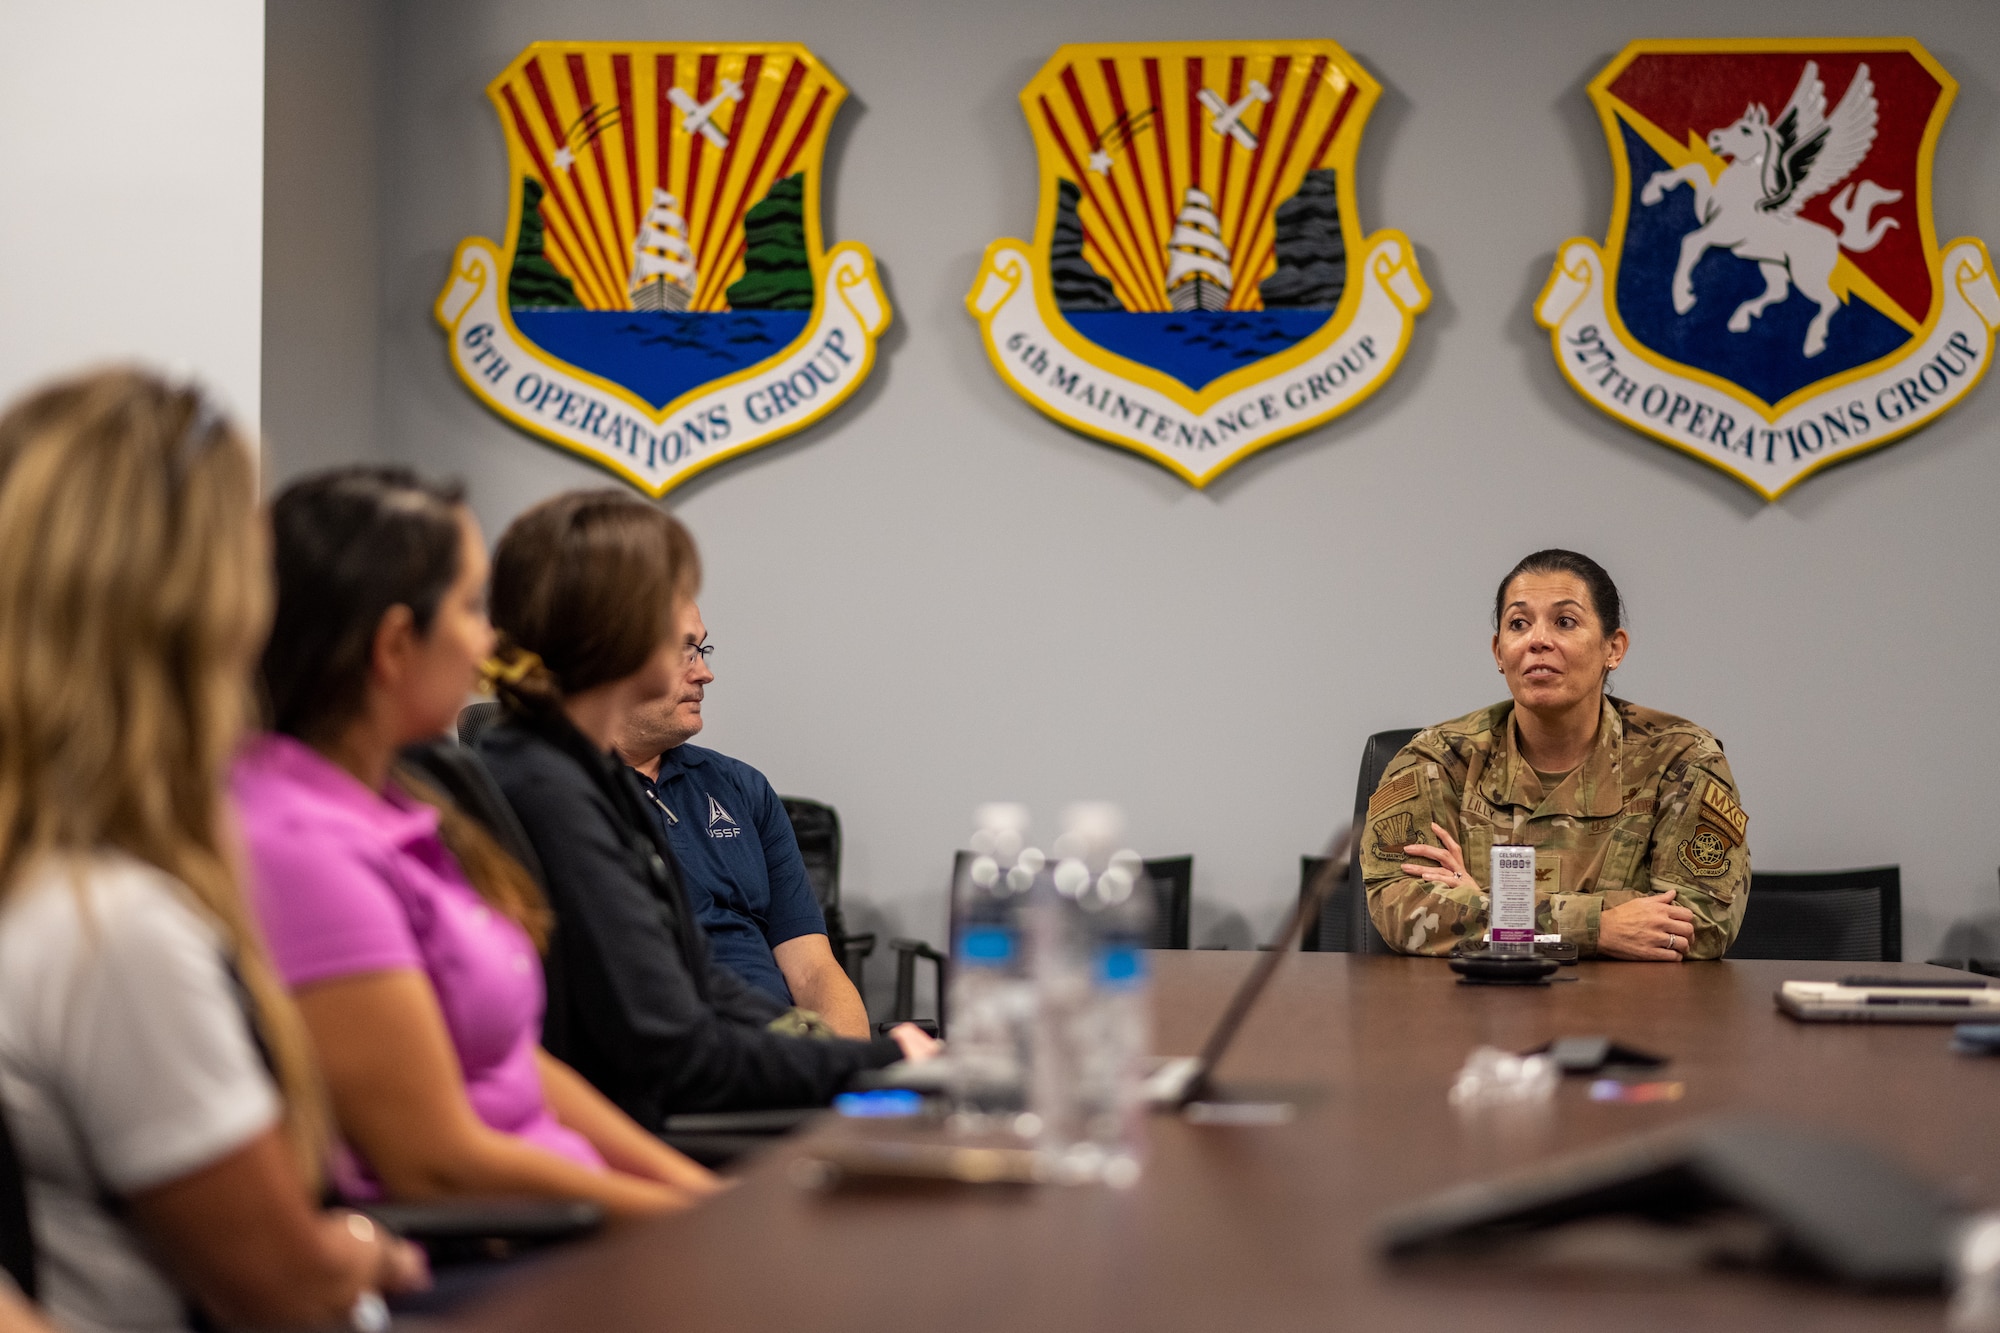 Following the tour, WIDL ambassadors met with 6th Operations and Maintenance Group leadership to share upcoming projects in the logistics industry. (U.S. Air Force photo by Airman 1st Class Zachary Foster)